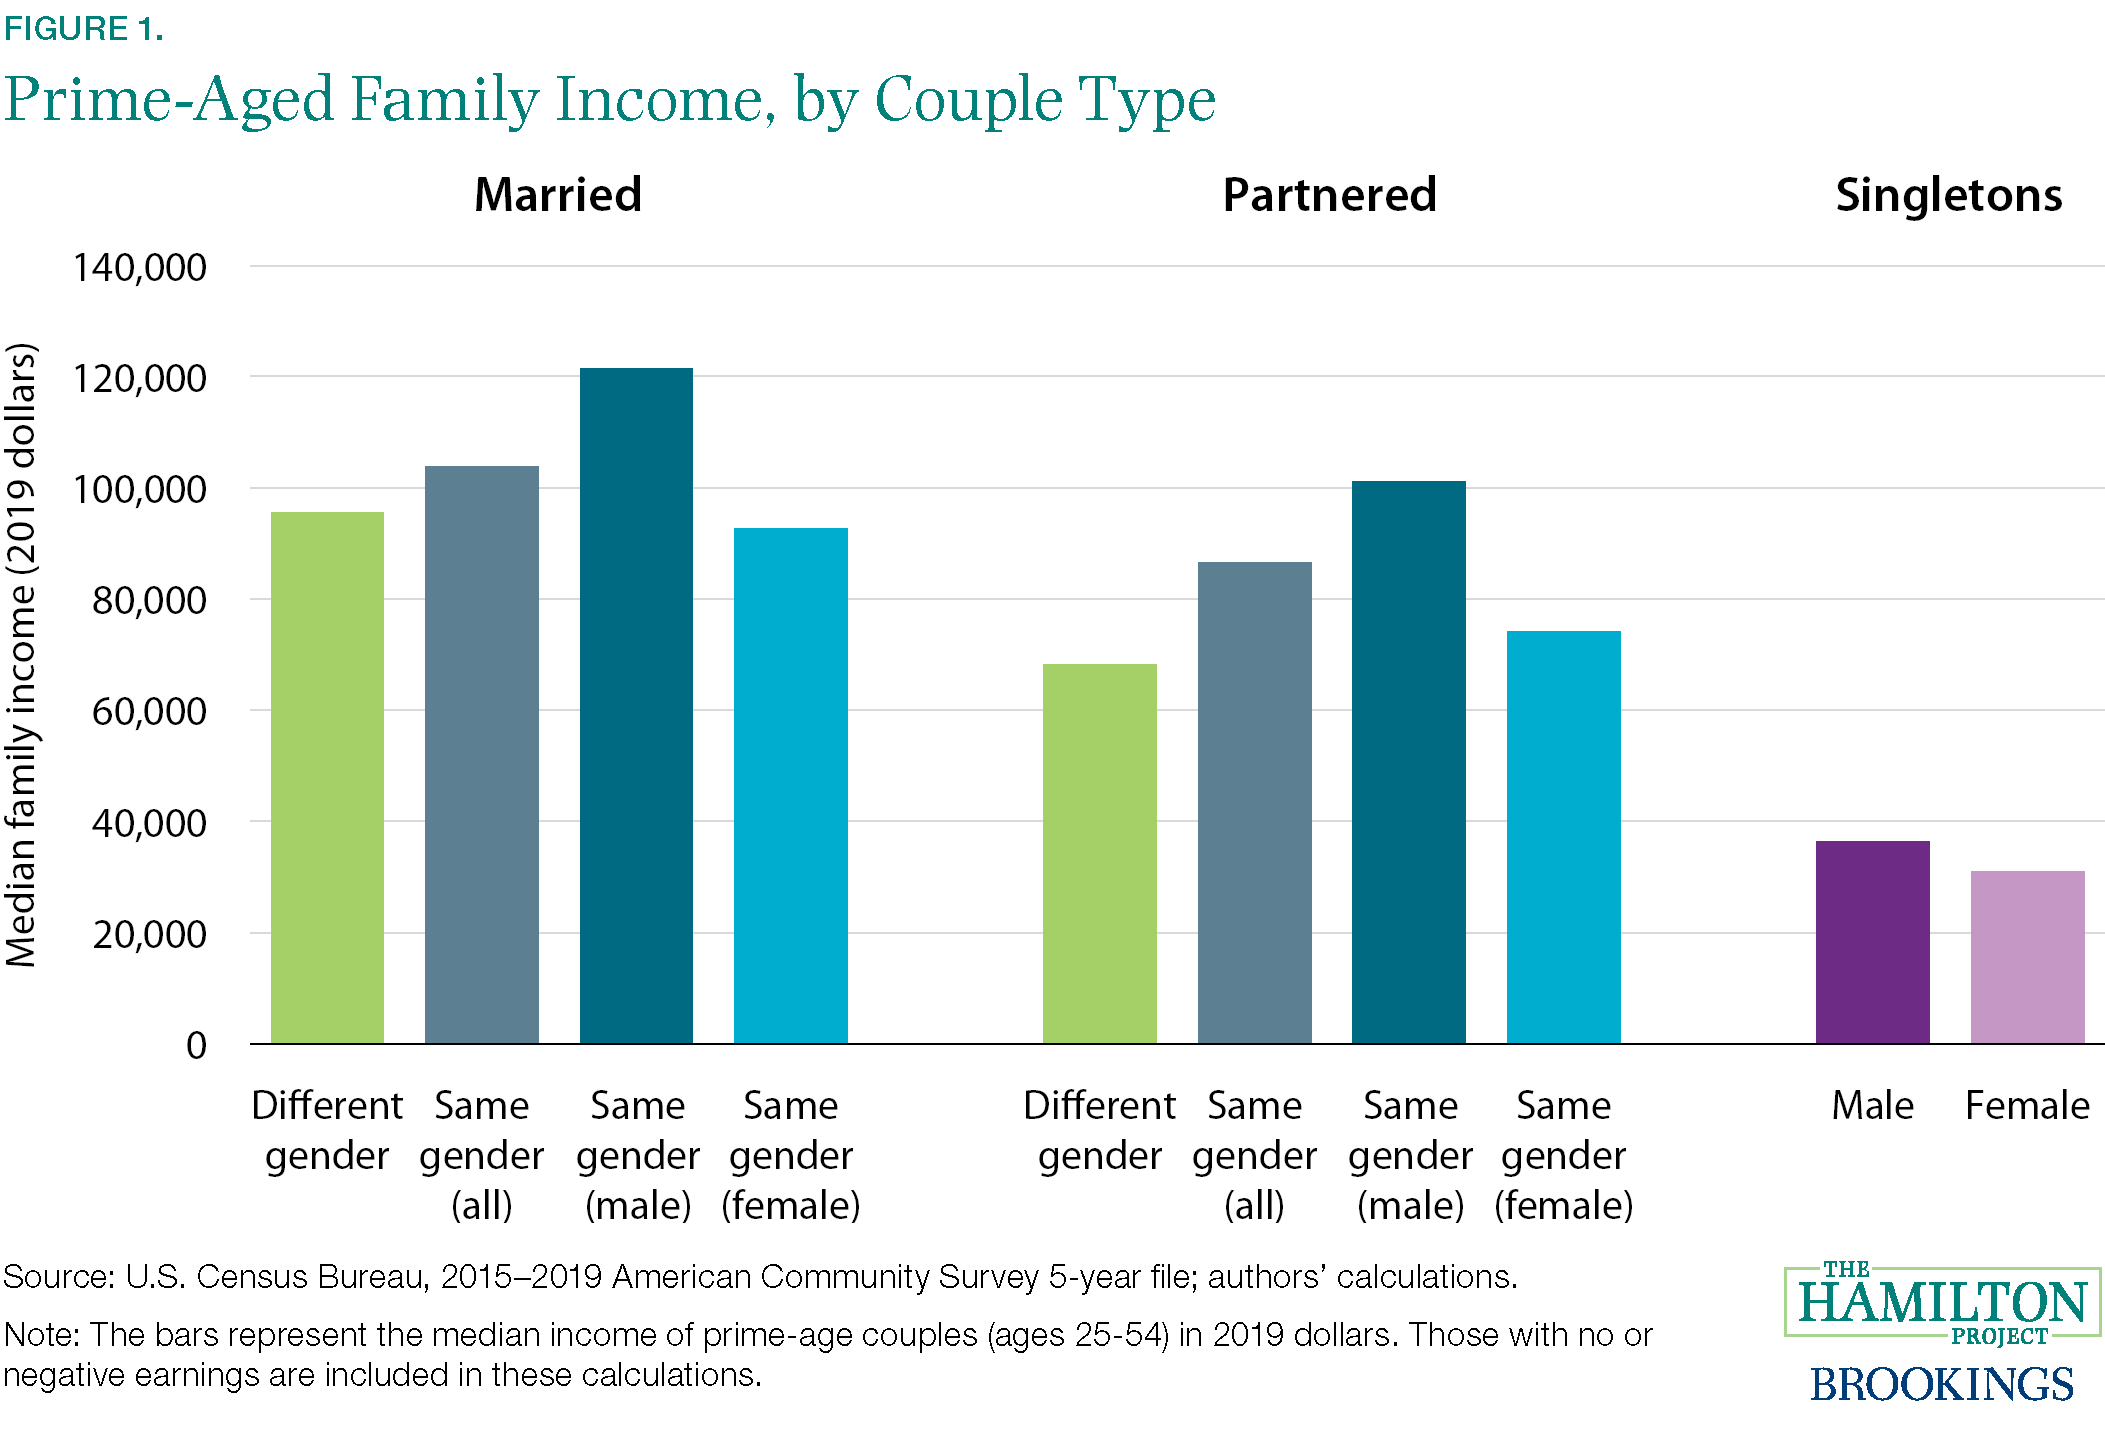 Figure illustrating prime-aged family income, by couple type.